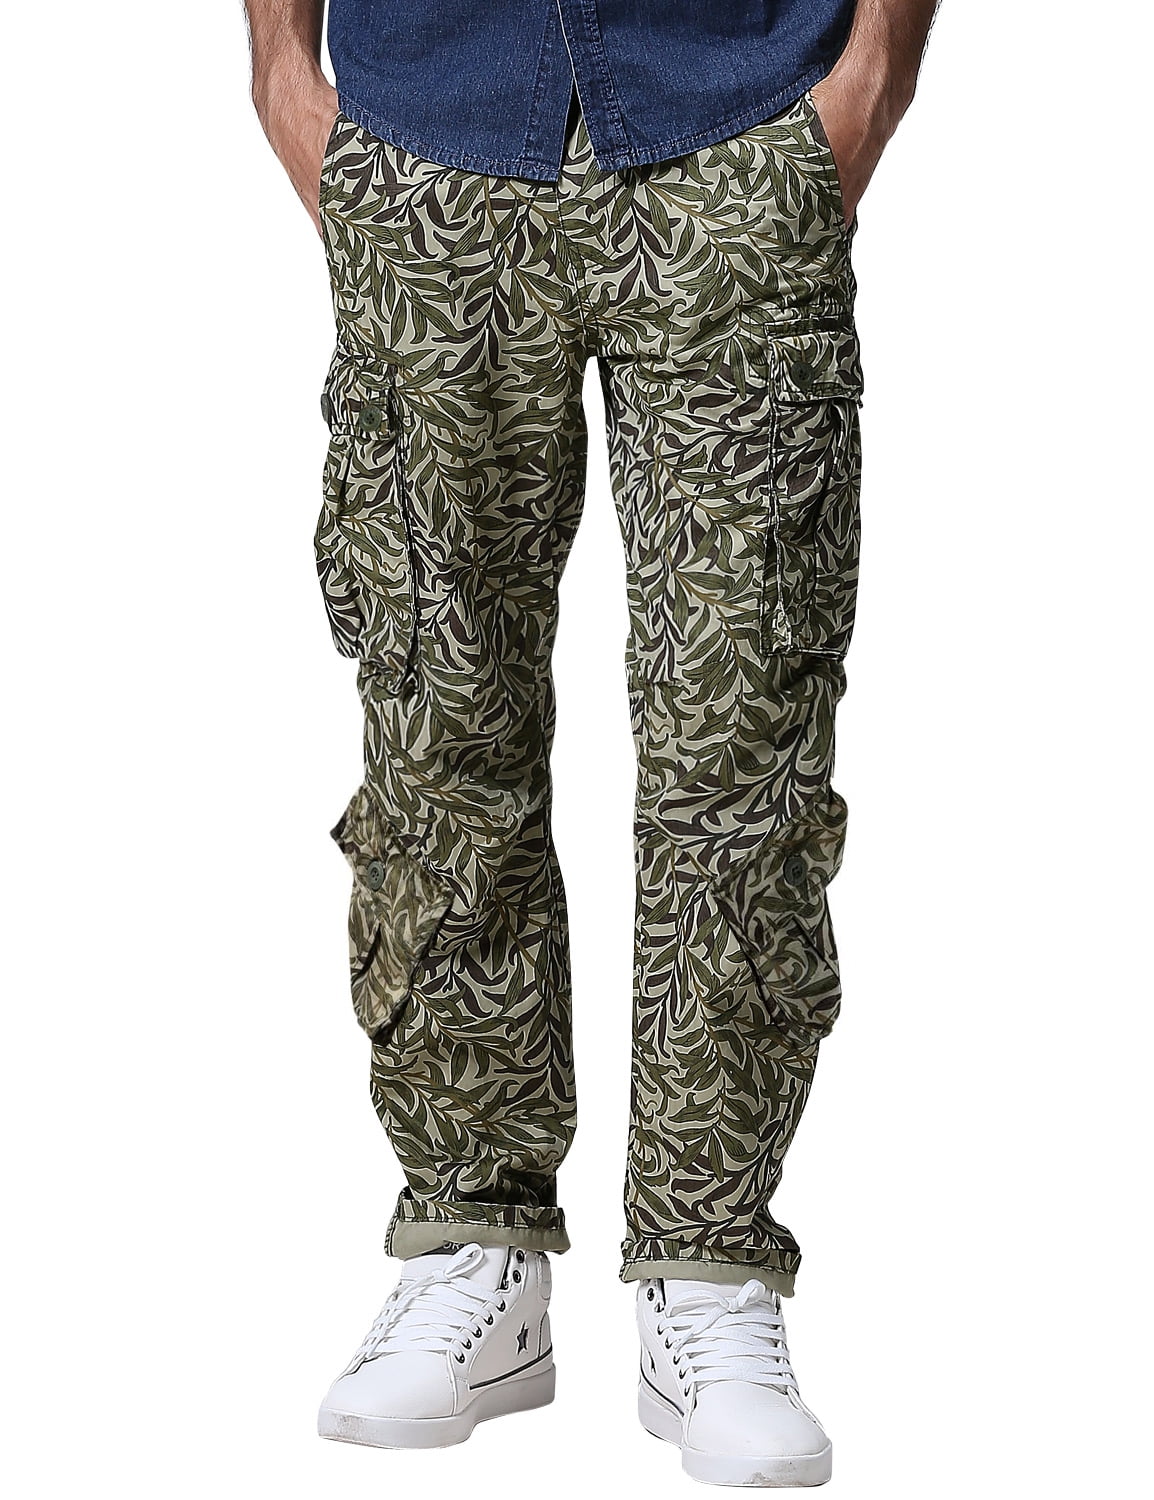 Matchstick Men's Camouflage Cargo Pants Outdoors Combat Loose Relaxed ...